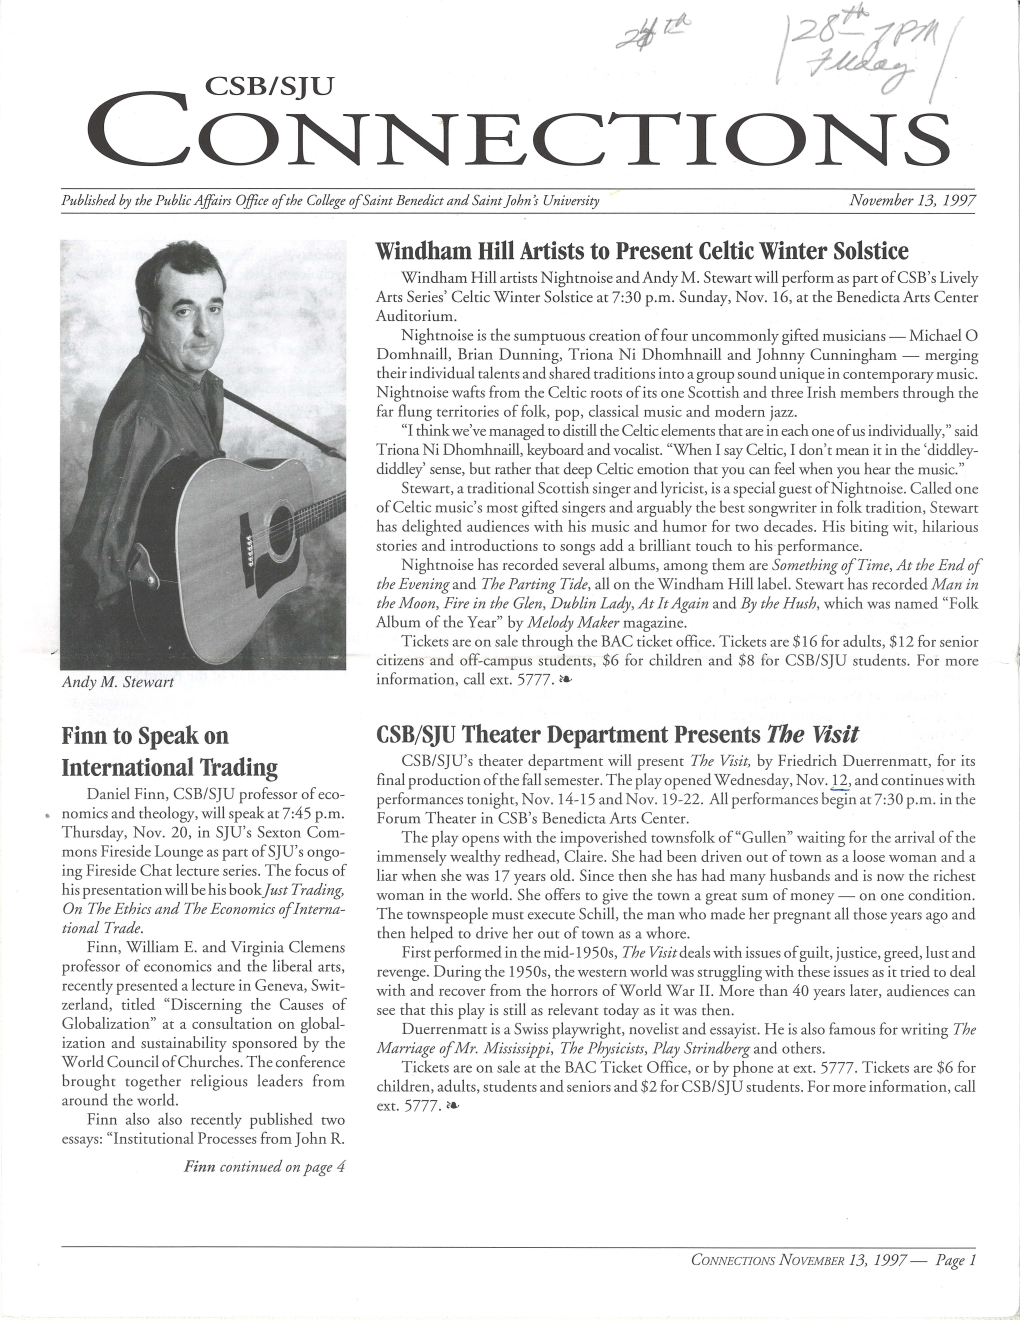 CONNECTIONS Published by the Public Affairs Office A/The College A/Saint Benedict and Saint John's University November 13, 1997